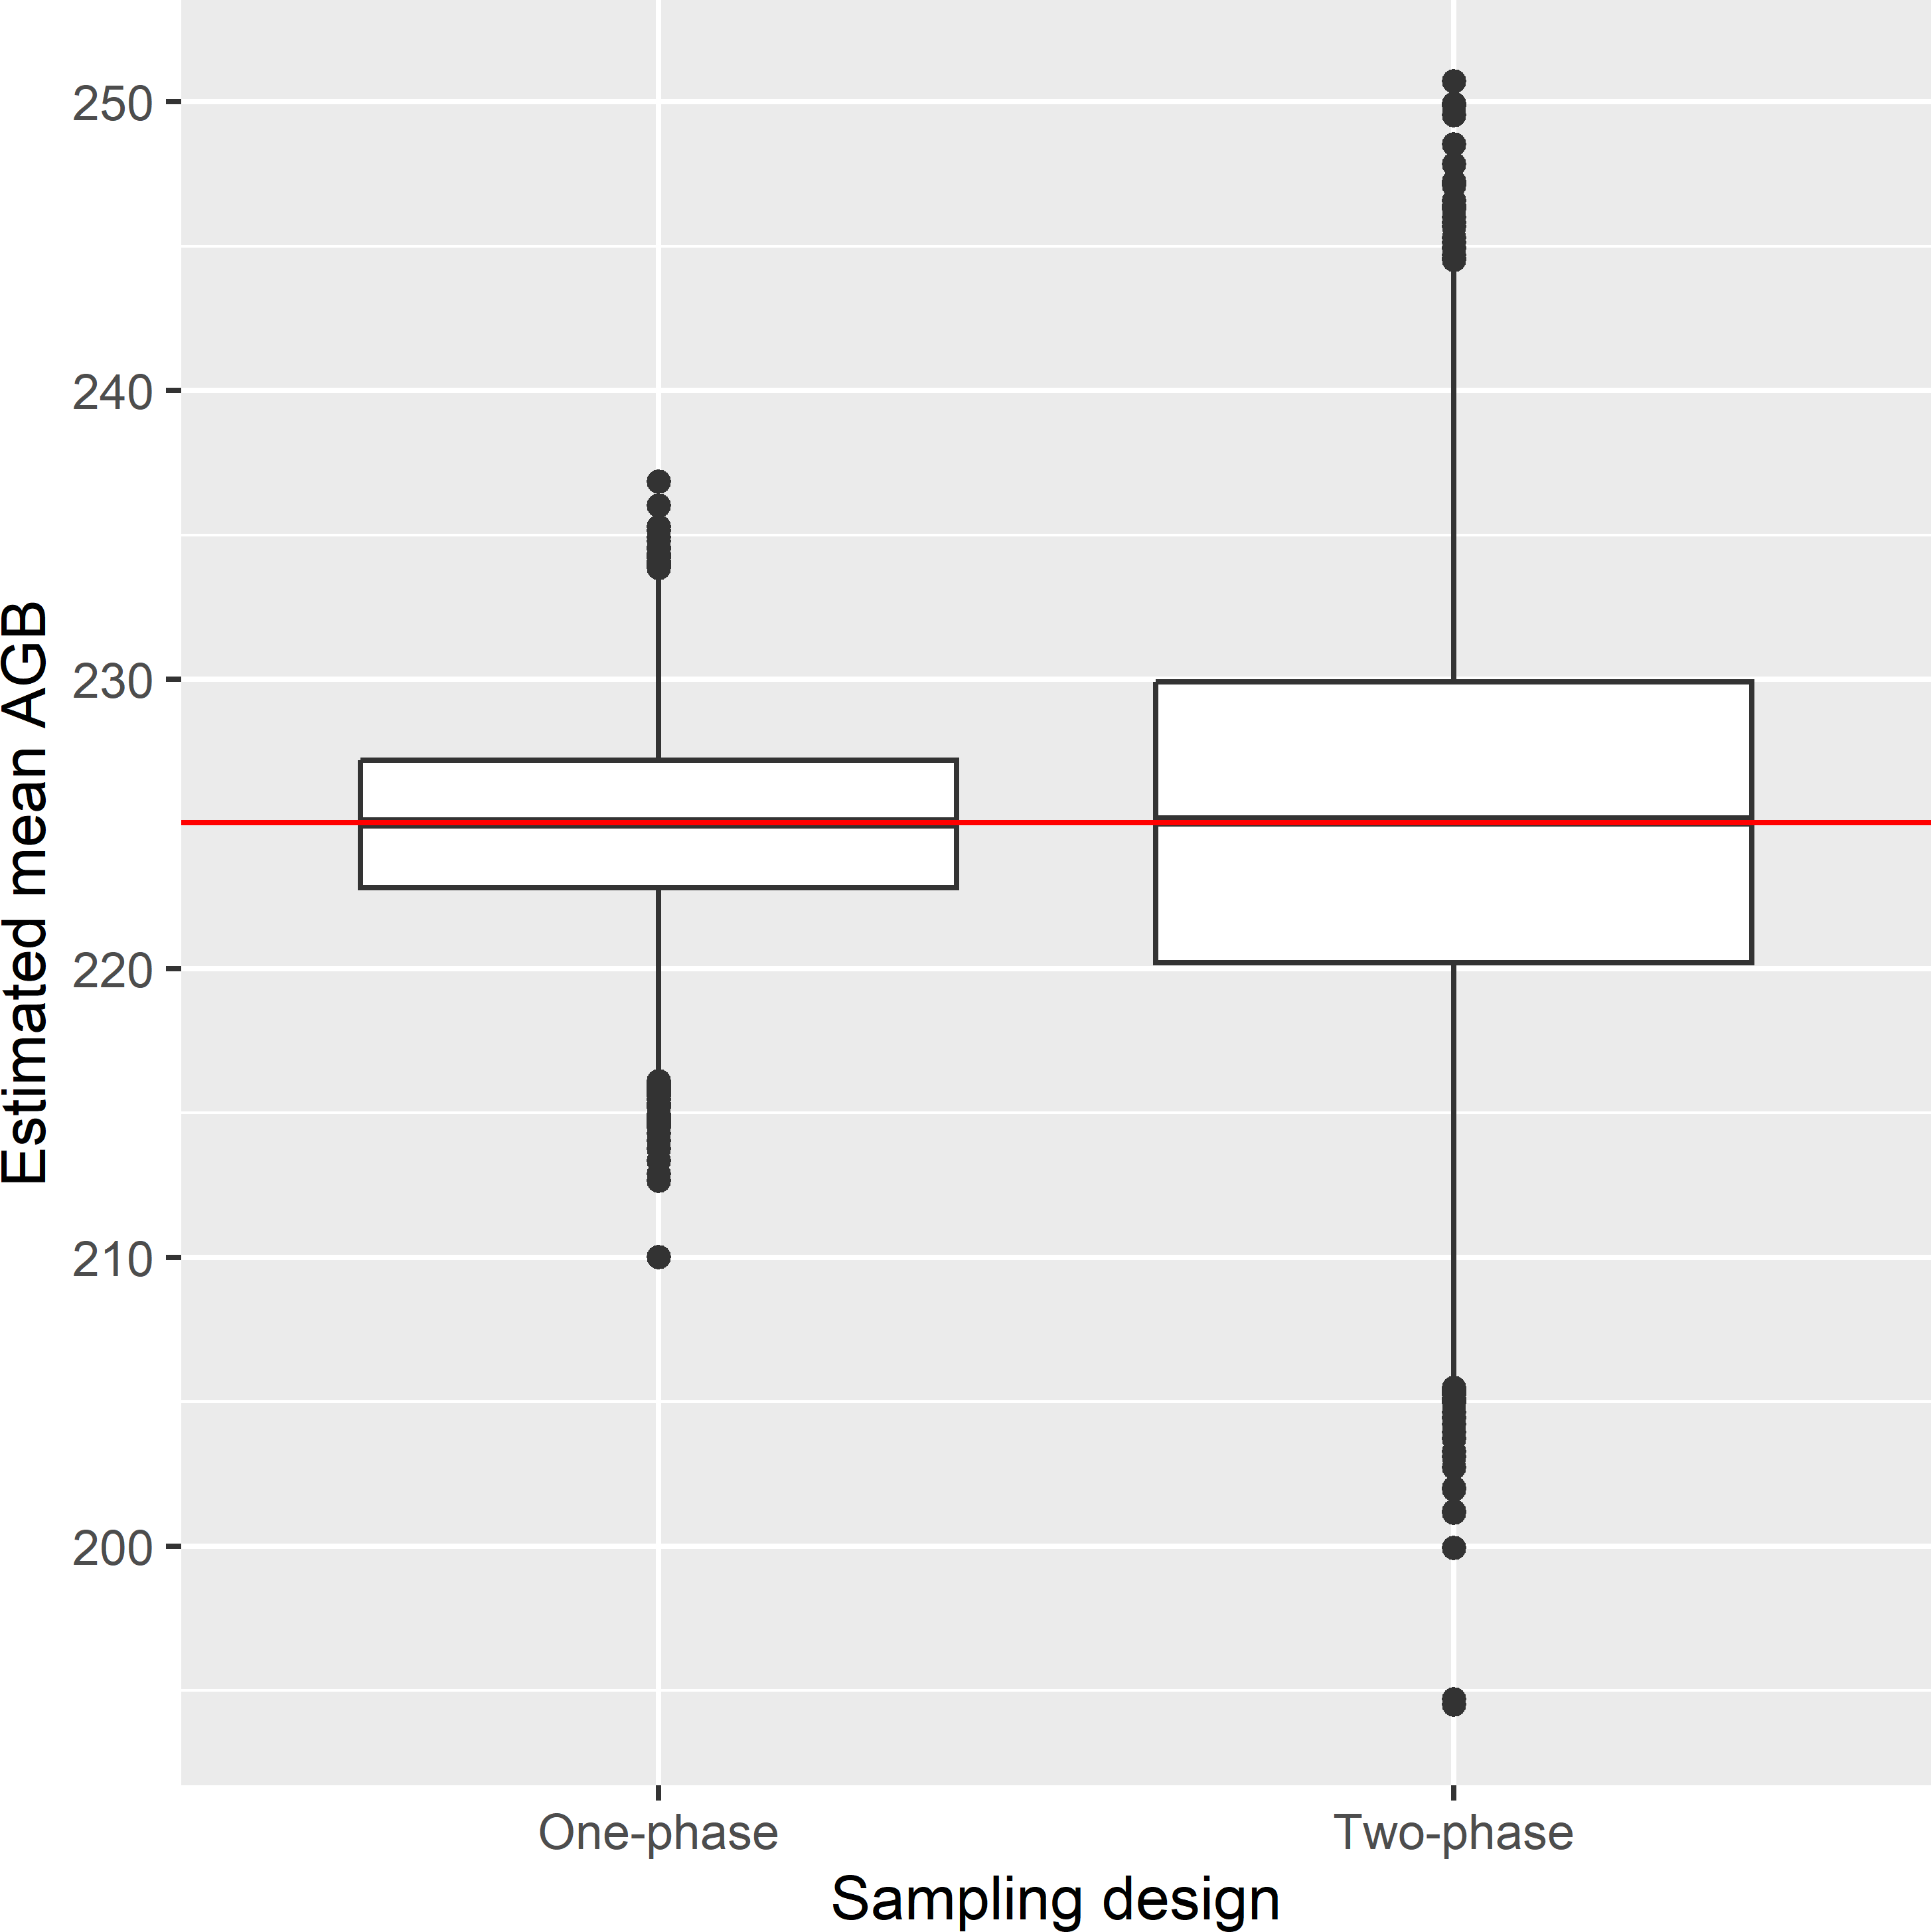 Approximated sampling distribution of the simple regression estimator of the mean AGB (109 kg ha-1) in Eastern Amazonia in the case that the covariate is observed for all sampling units (one-phase) and for the subsample only (two-phase).